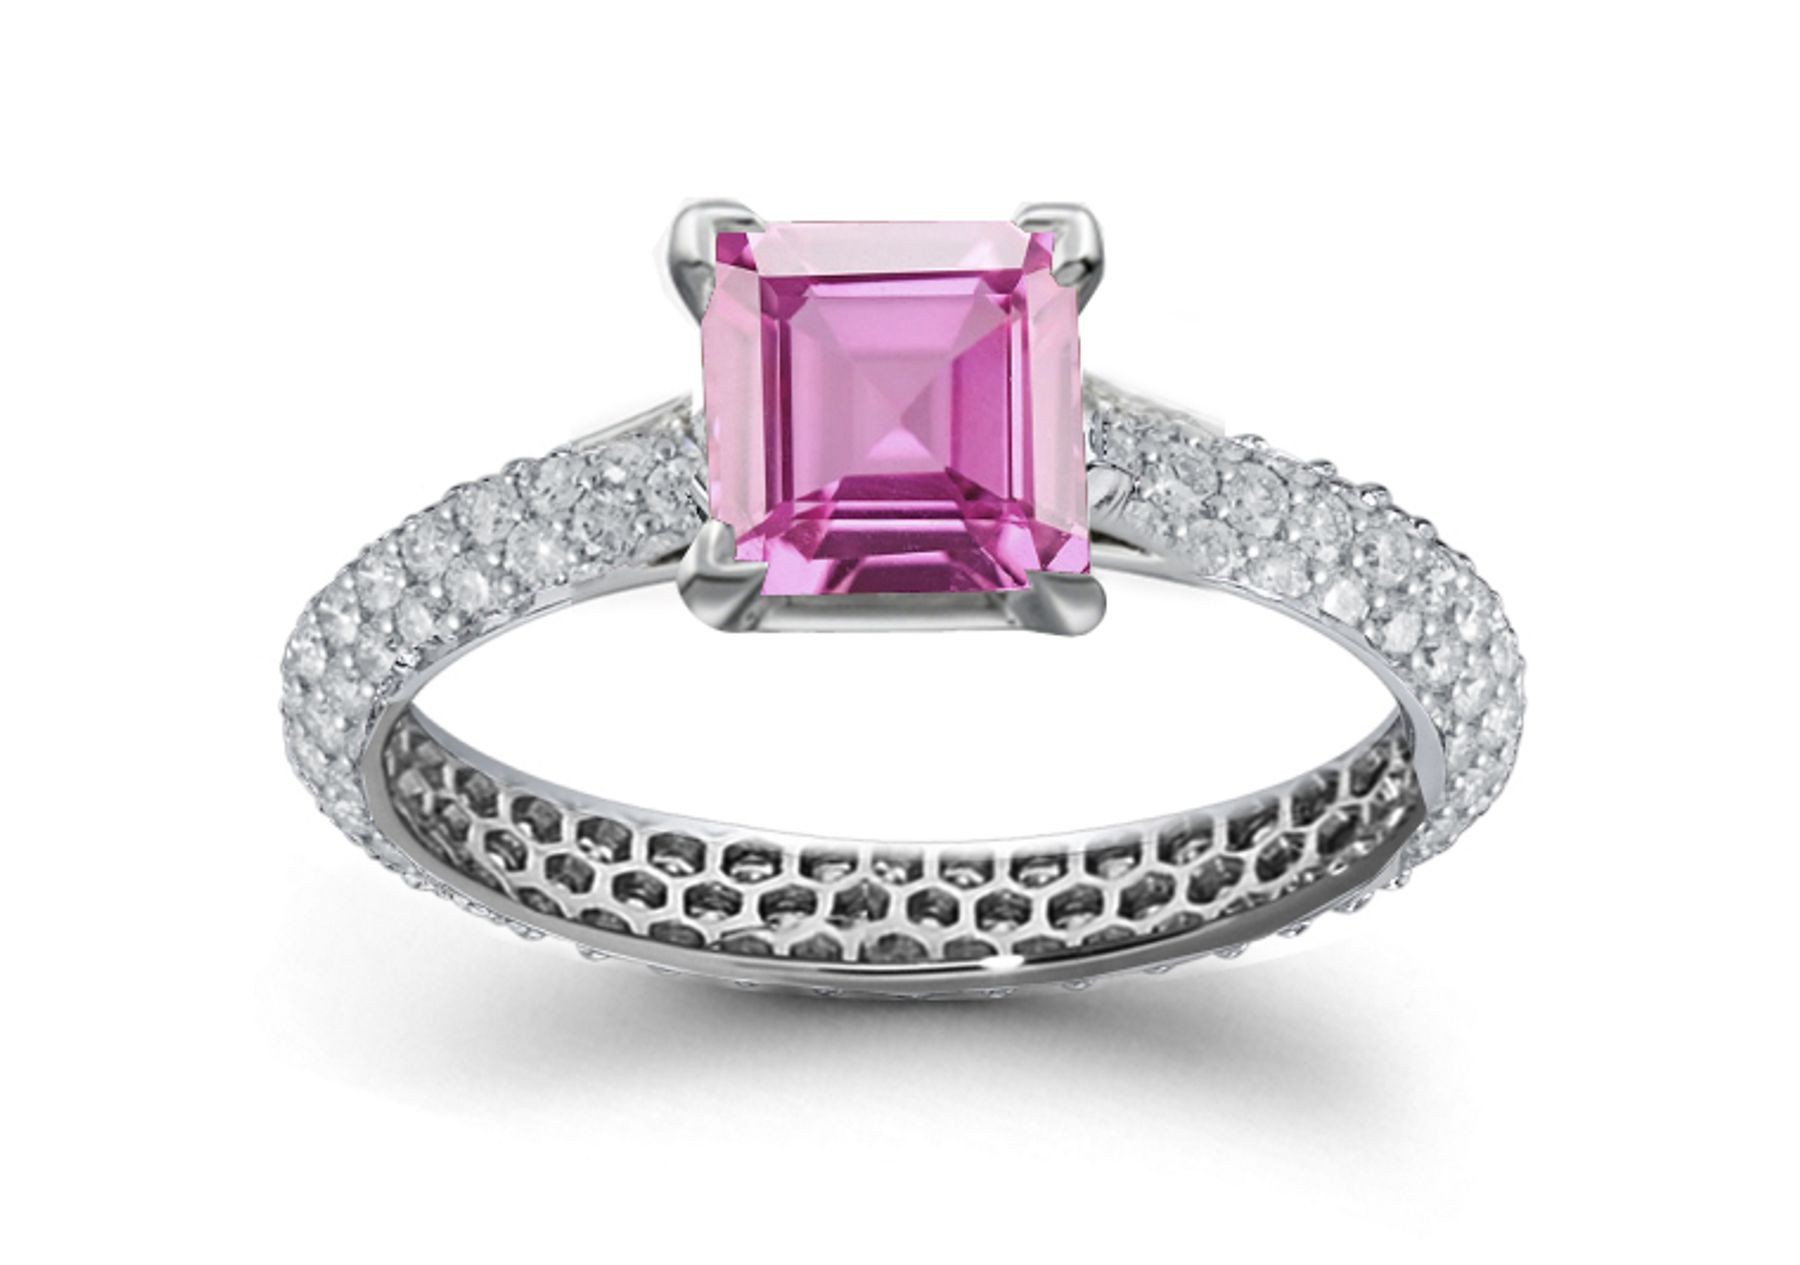 Butterfly Gallery: Princess Cut Rich Pink Sapphire & Pave Set White Diamonds Shank Ring